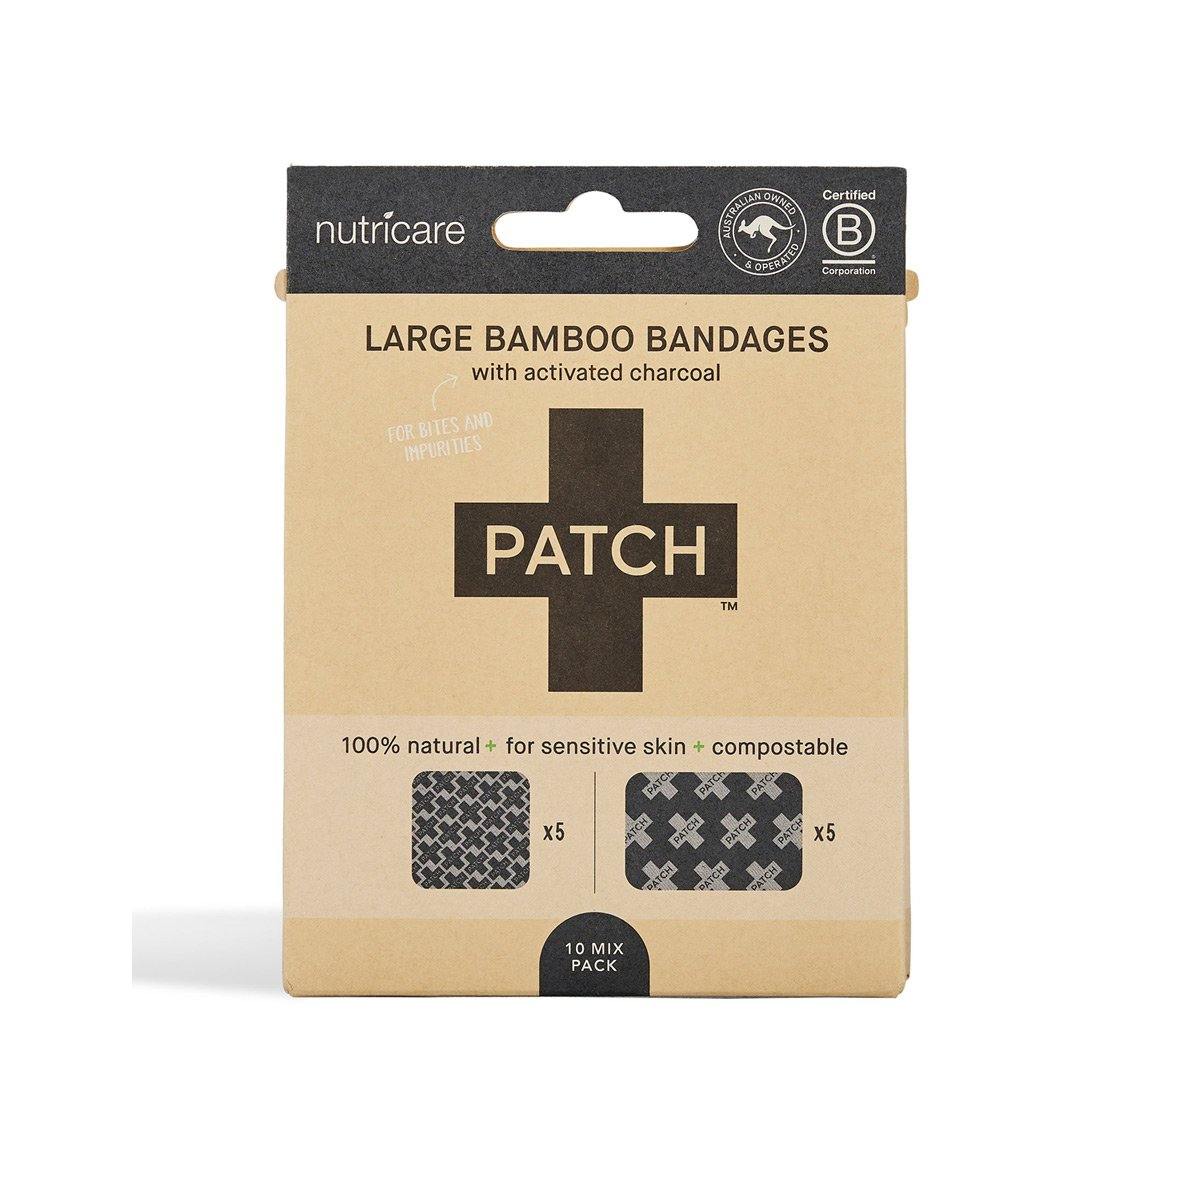 PATCH Large Bandage Charcoal Packaging Front